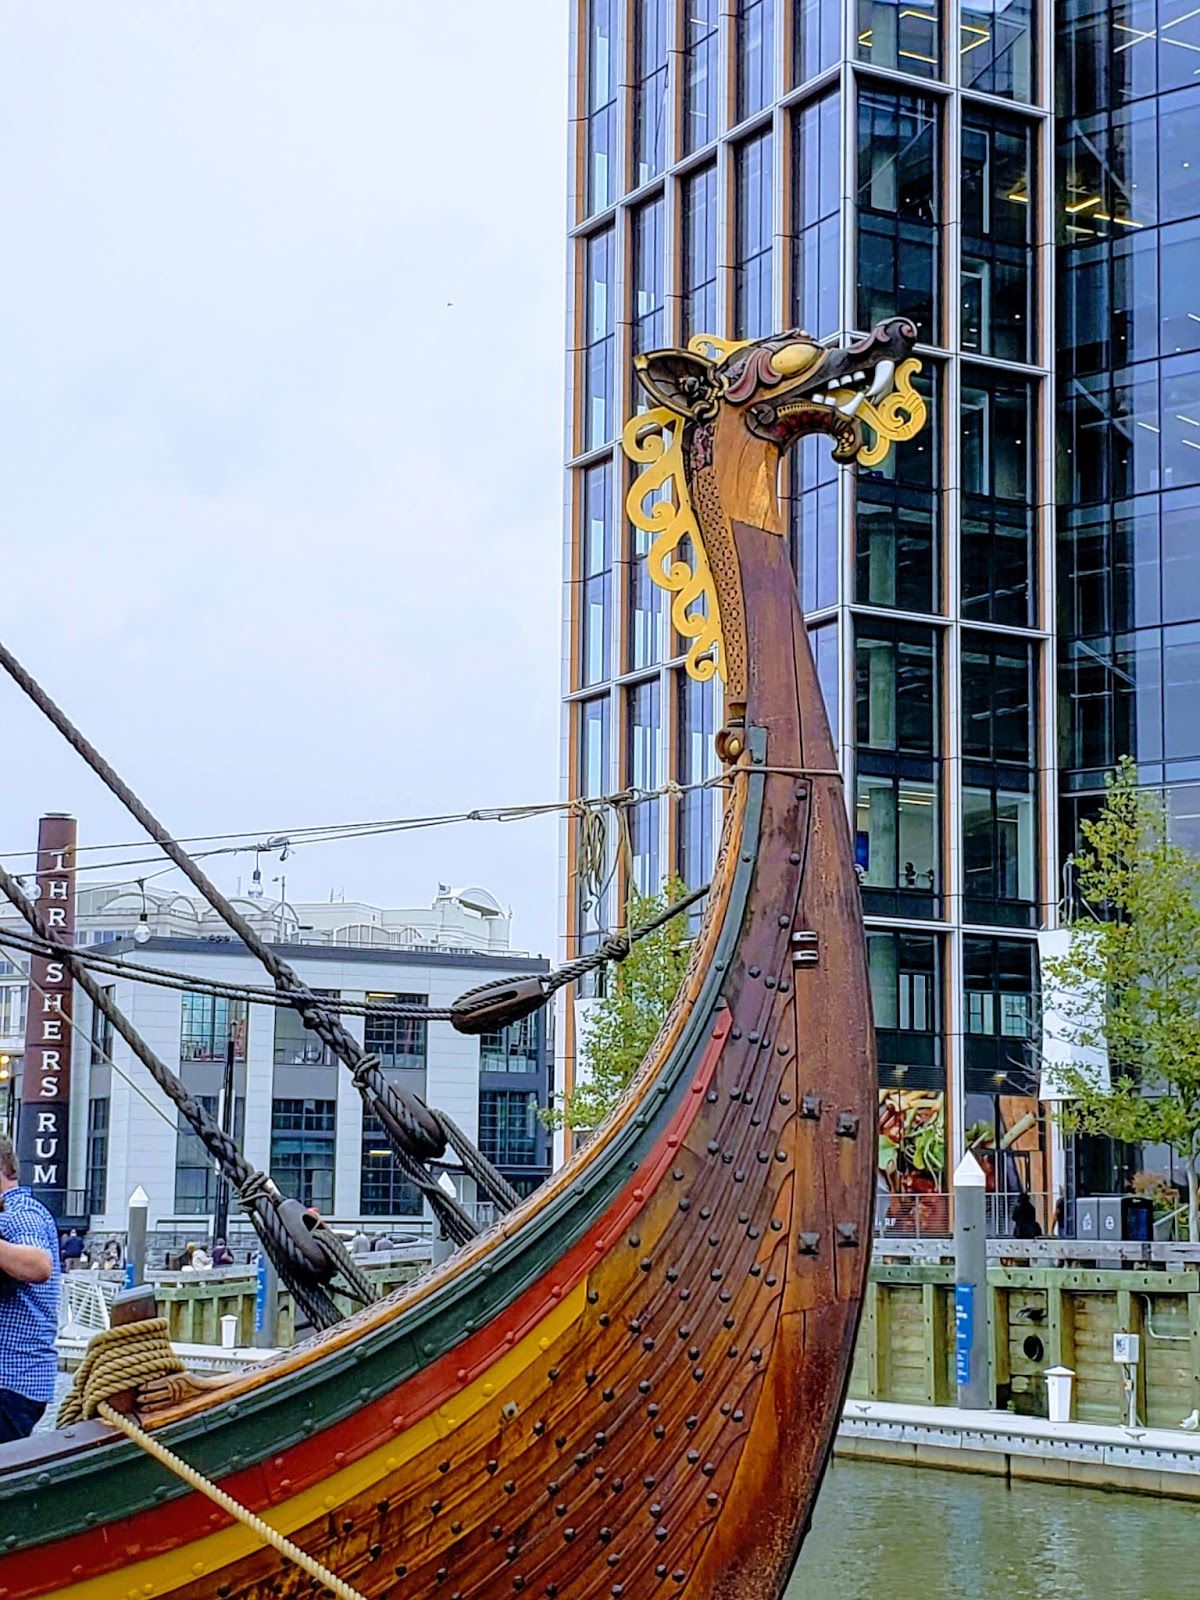 The prow of a wooden Viking boat rises up in the foreground of the picture, adorned with a golden dragon head. In the background, water, then a modern glass skyscraper, and a smokestack advertising Thrasher’s Rum. (It’s nice rum if you get the chance.)